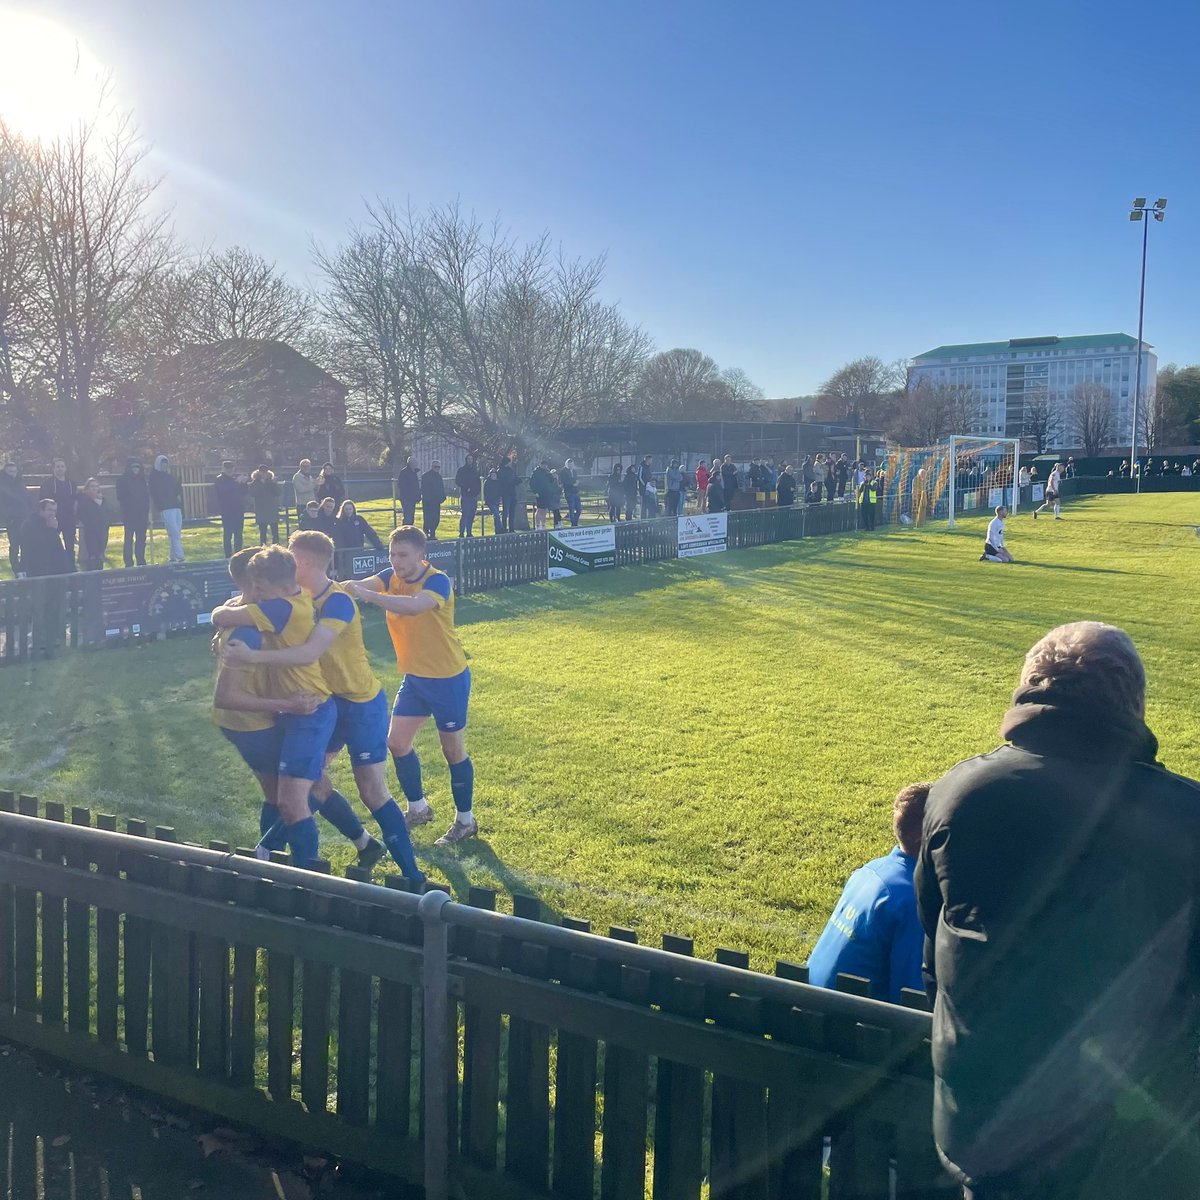 Town 2-1 United. Brilliant today lads 💛💙